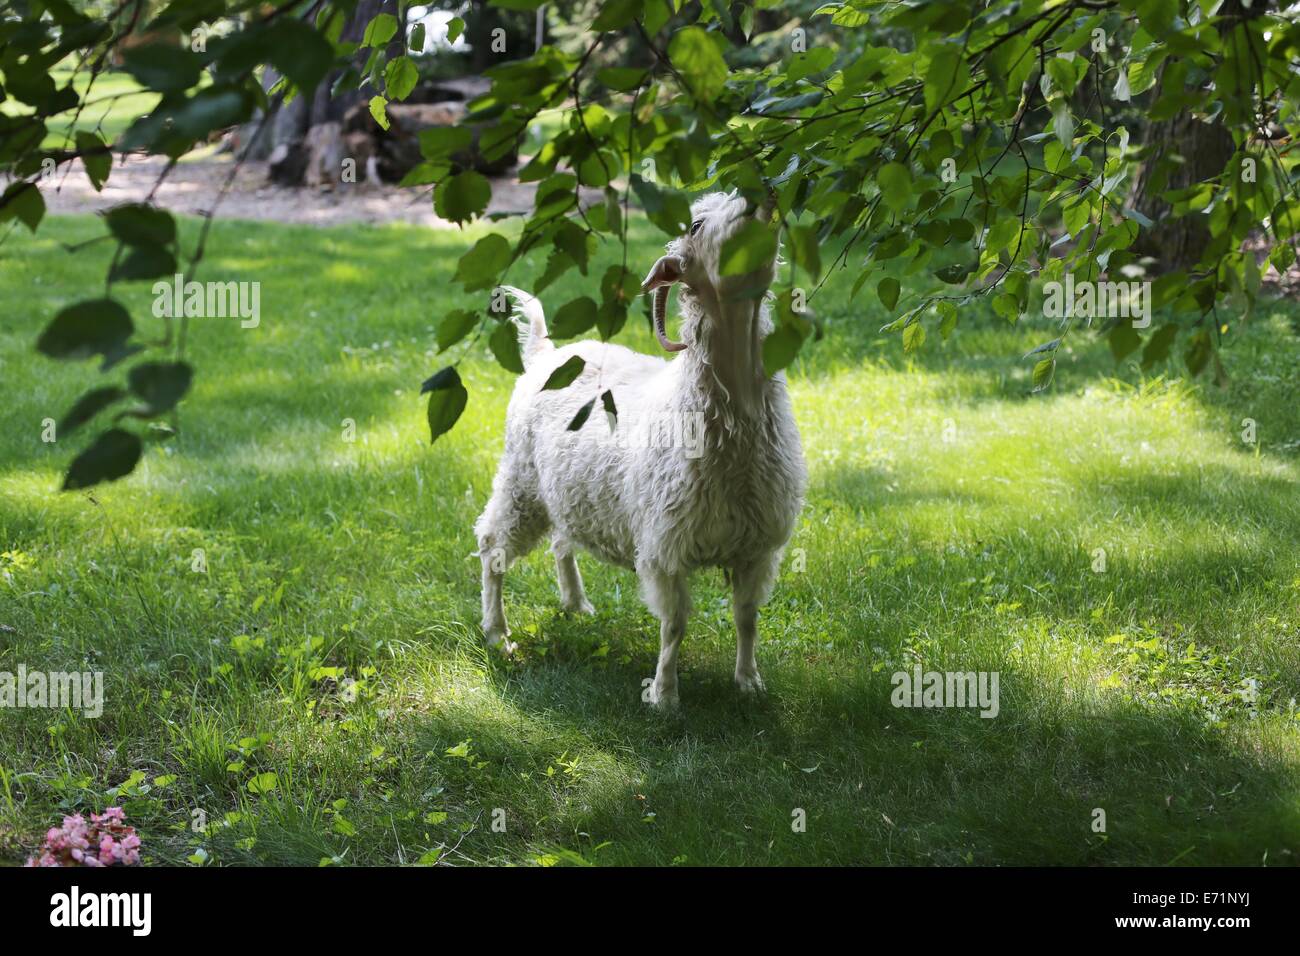 A goat chewing on leaves on a tree. Stock Photo